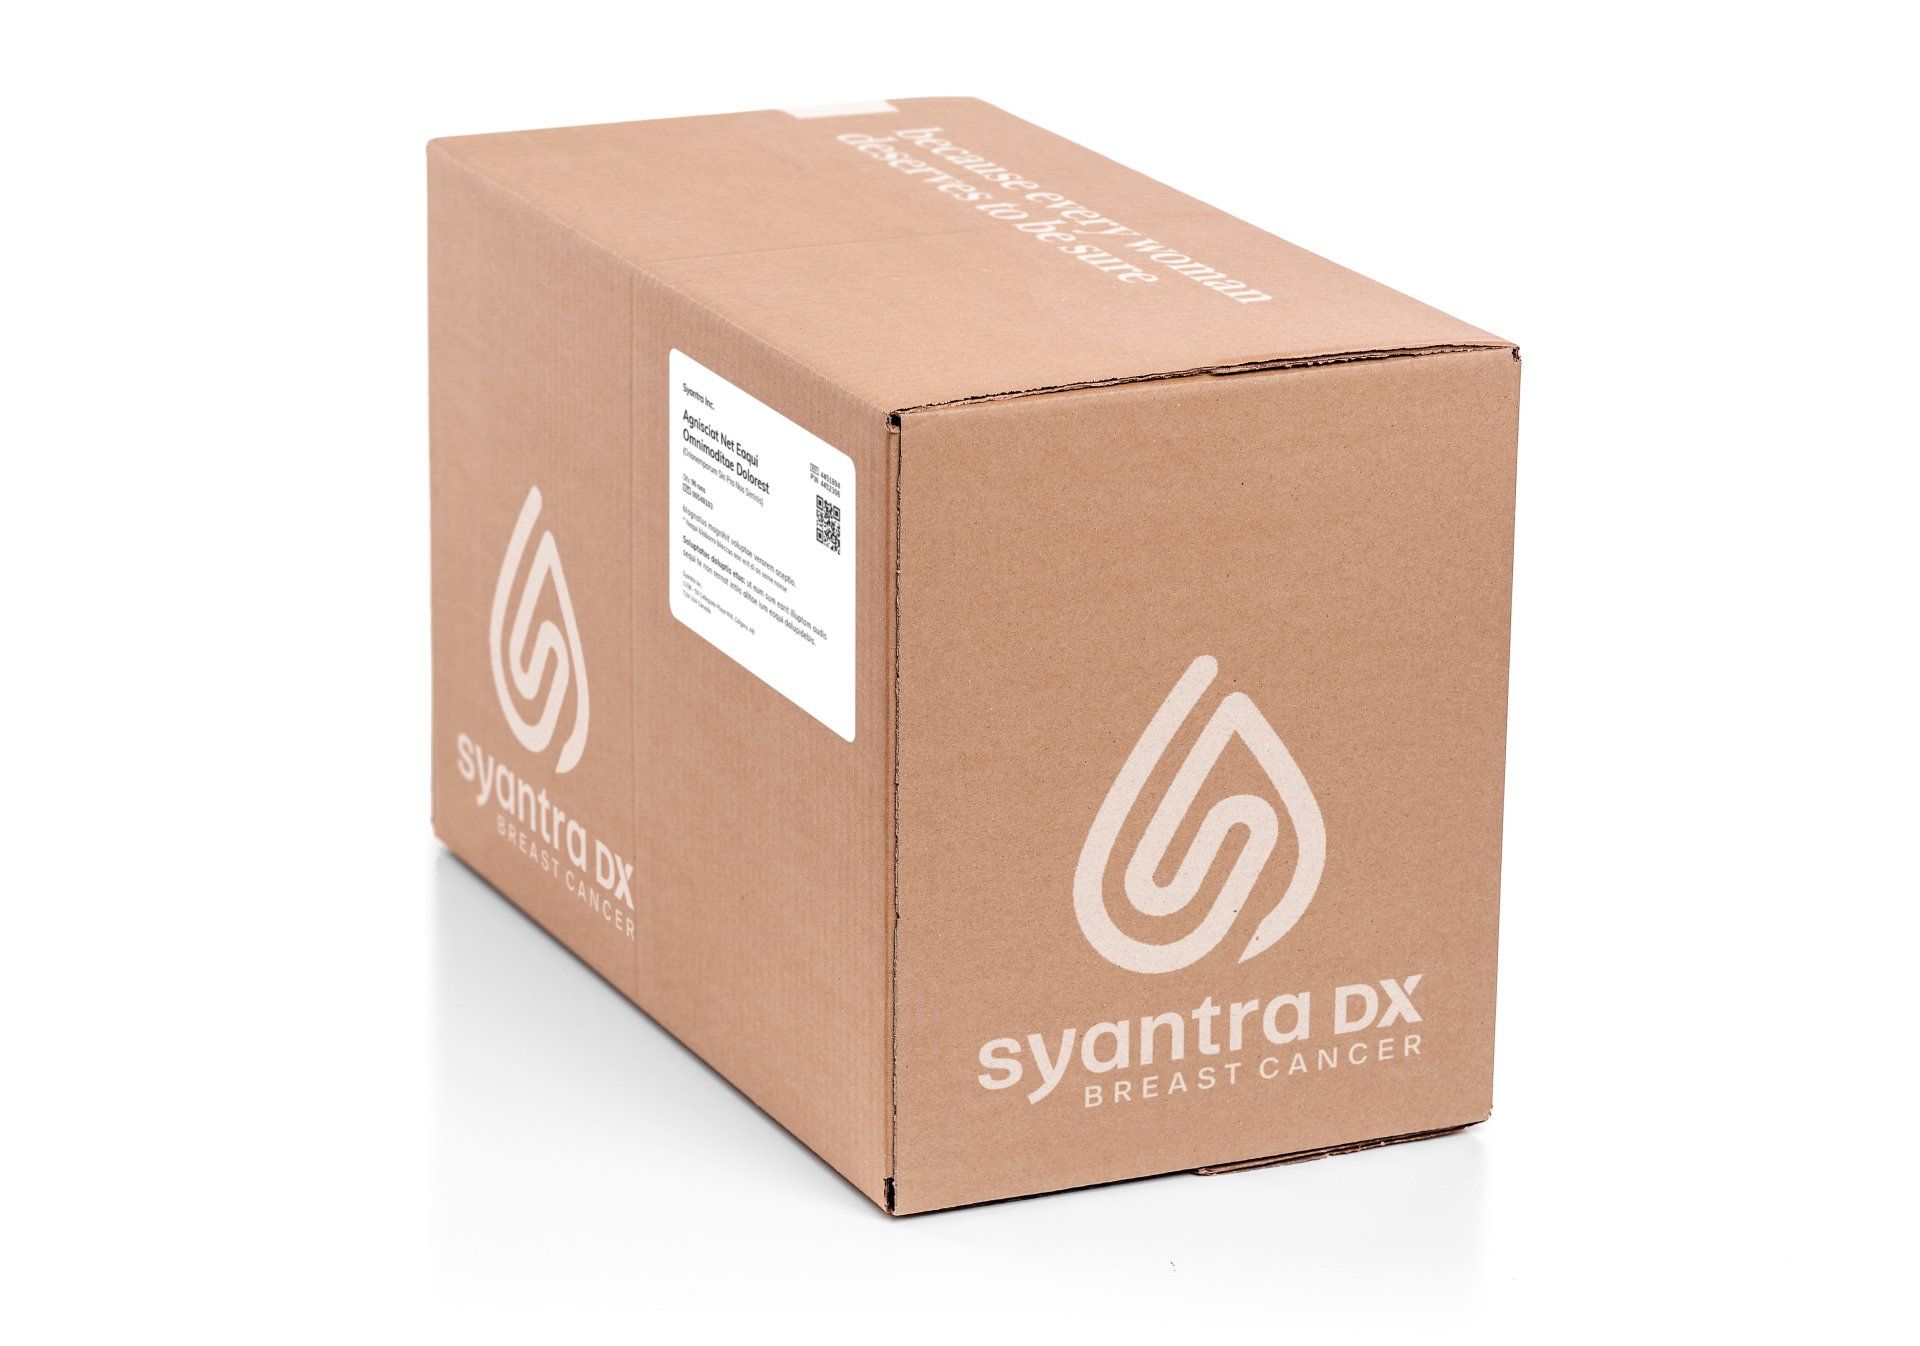 PRODUCT PACKAGING CREATED BY IVY DESIGN INC FOR SYANTRA INC